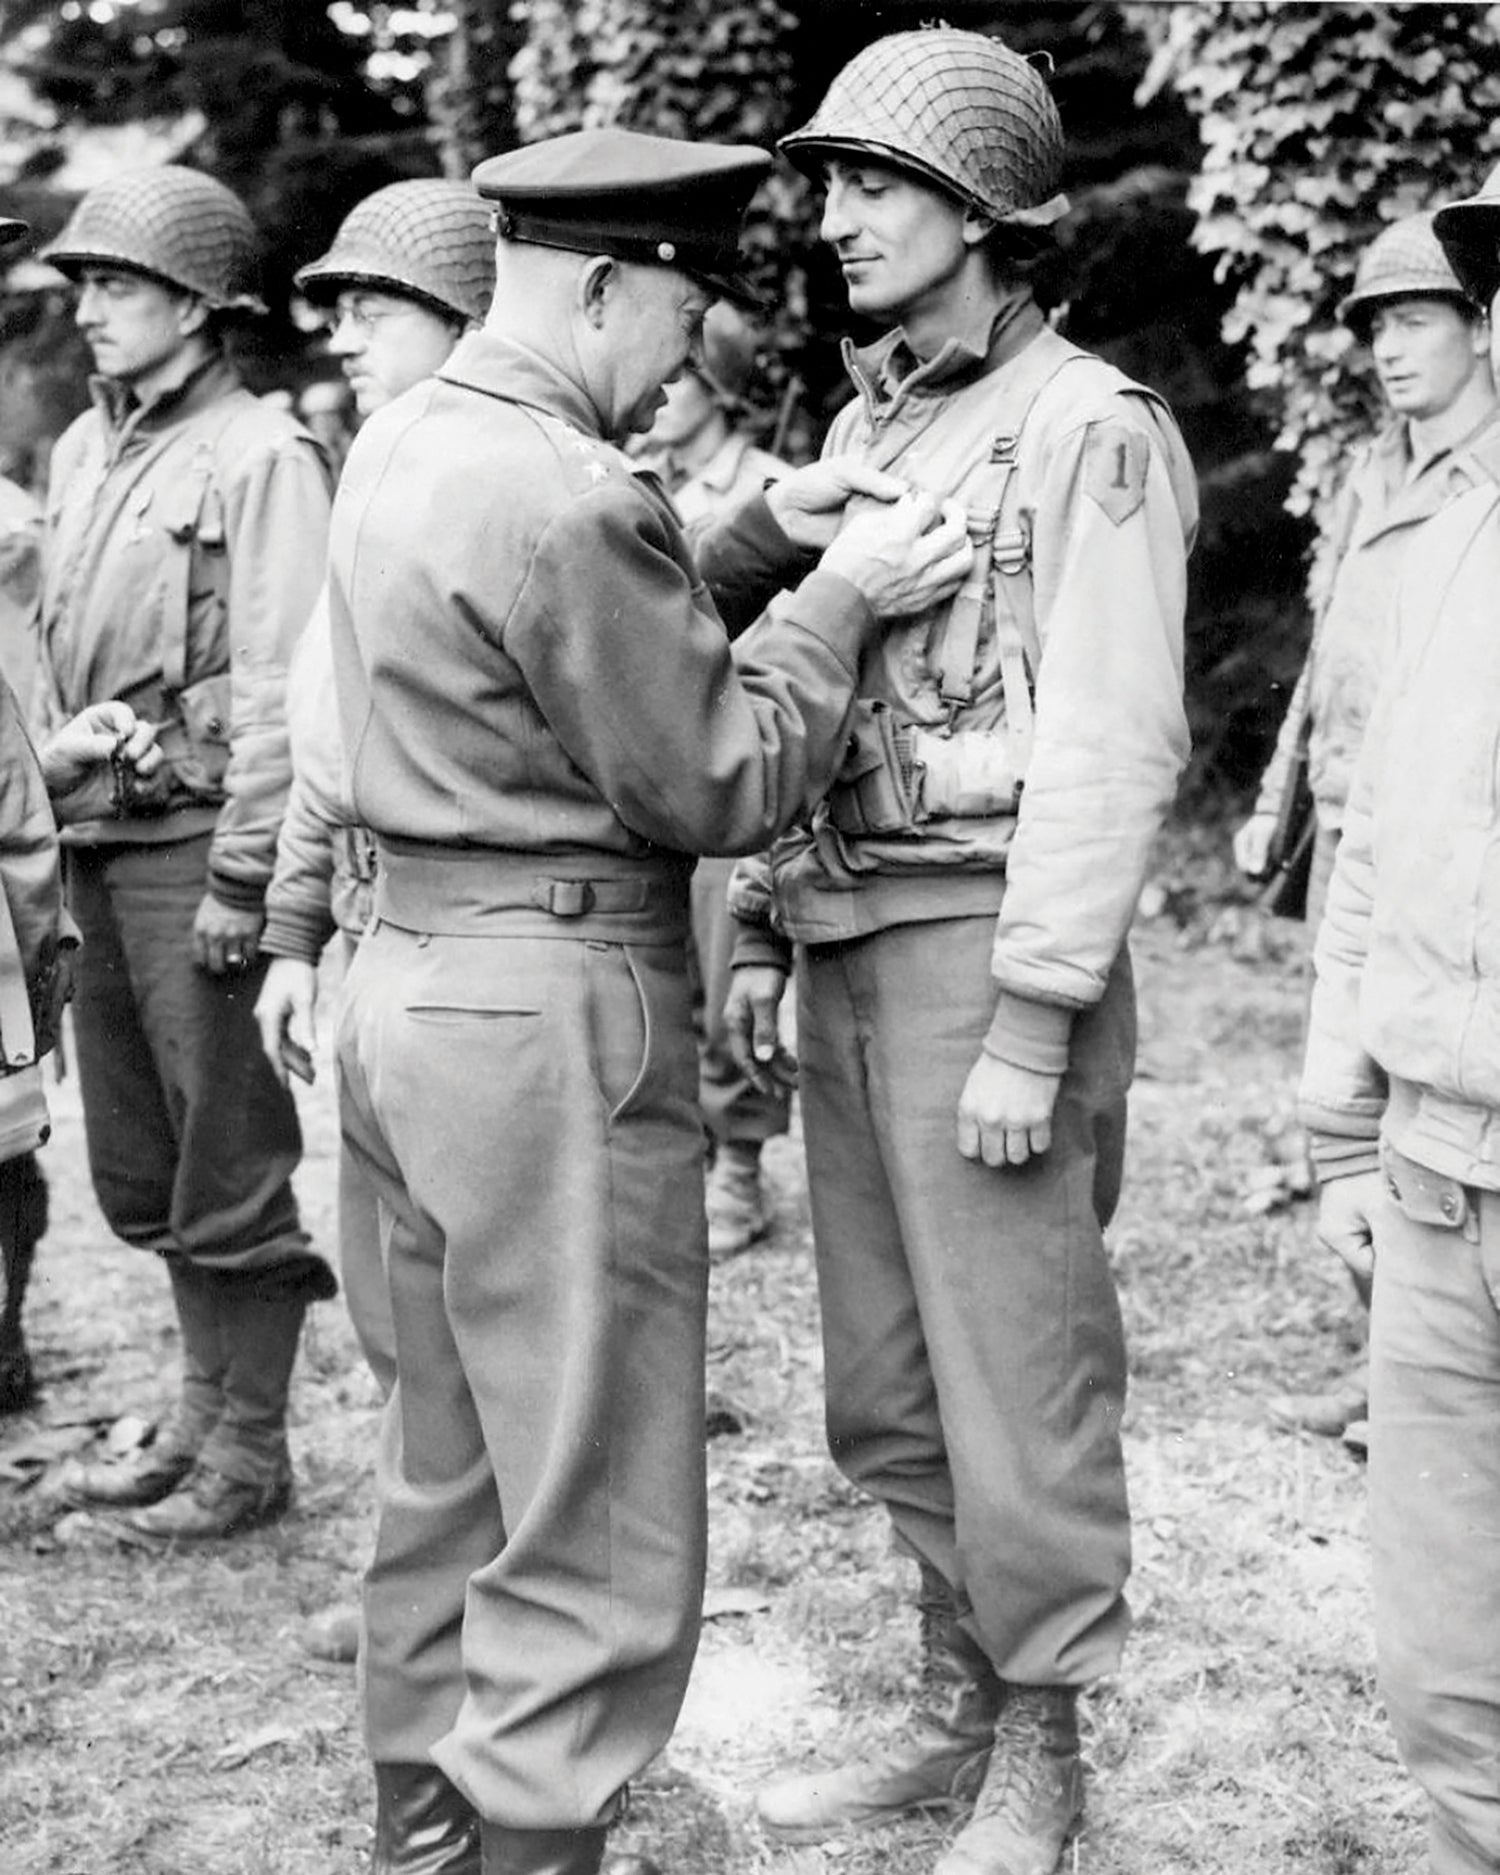 Supreme Allied Commander Gen. Dwight Eisenhower pins the Distinguished Service Cross on Capt. Joe Dawson for his heroic actions in Normandy, France, on D-Day in 1944. (Credit: National Archives)